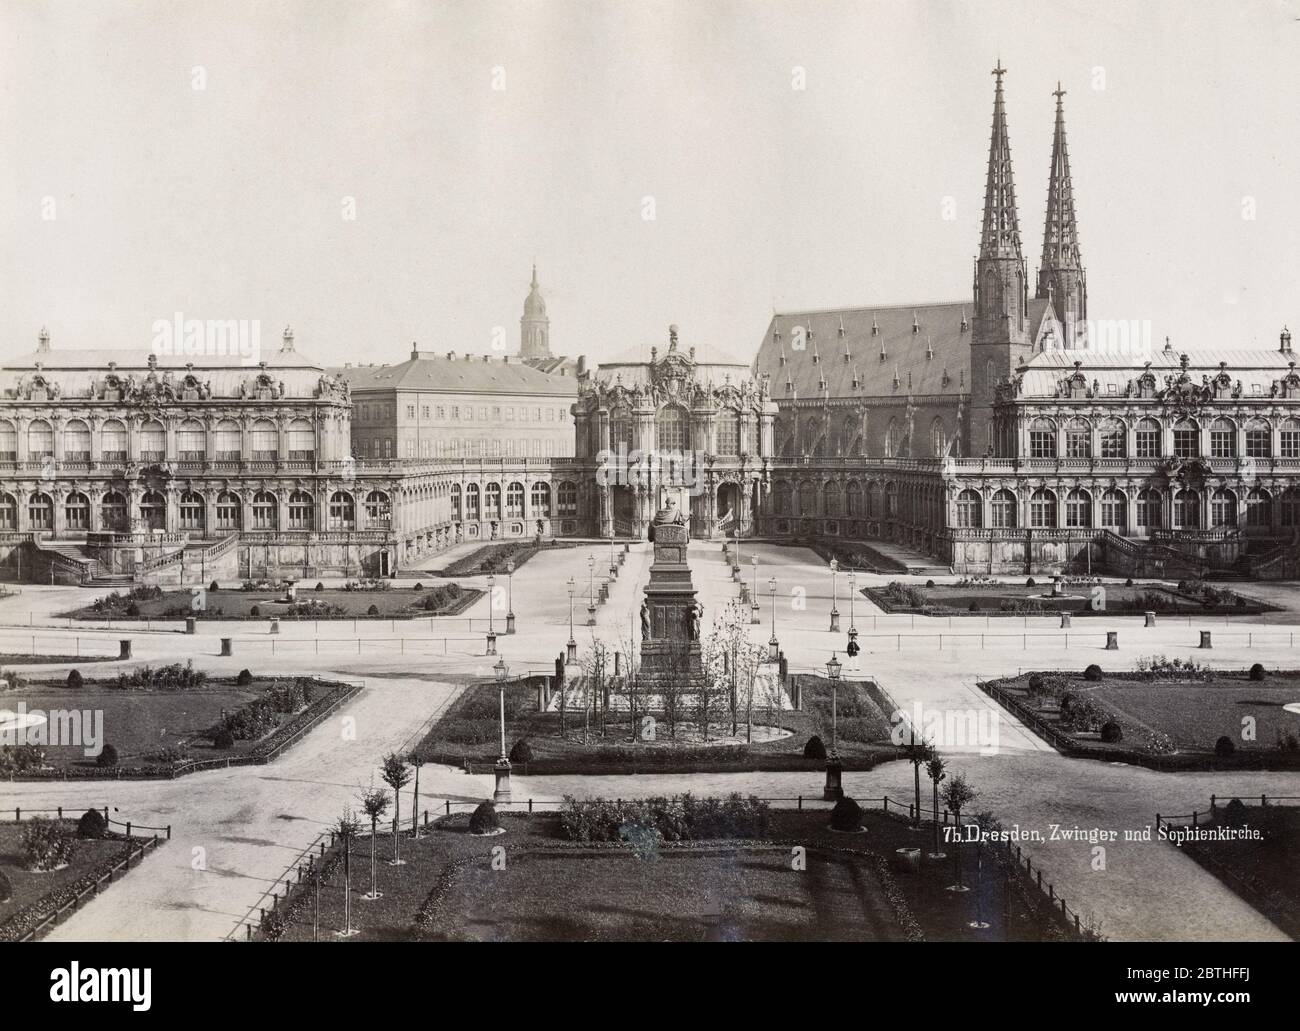 Vintage 19th century photograph - Sophienkirche, Dresden Germany, heavily bombed in World War II and demolished in 1962. Stock Photo